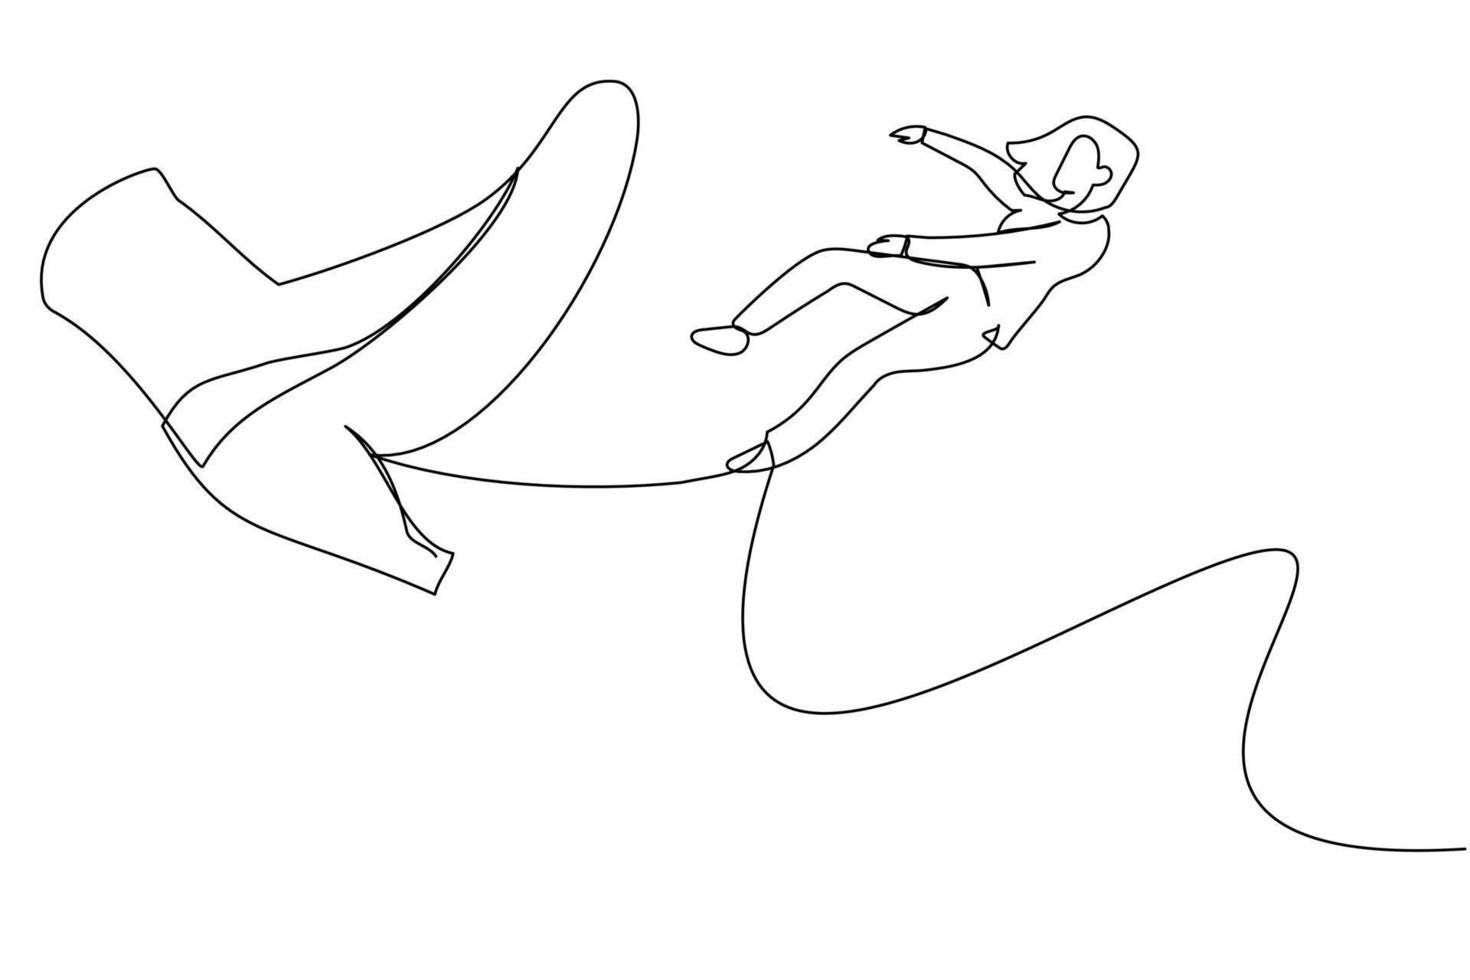 Single continuous line drawing failed businesswoman big foot kicking little women. Female employee kicked out by bigfoot, become unemployed from company. One line graphic design vector illustration